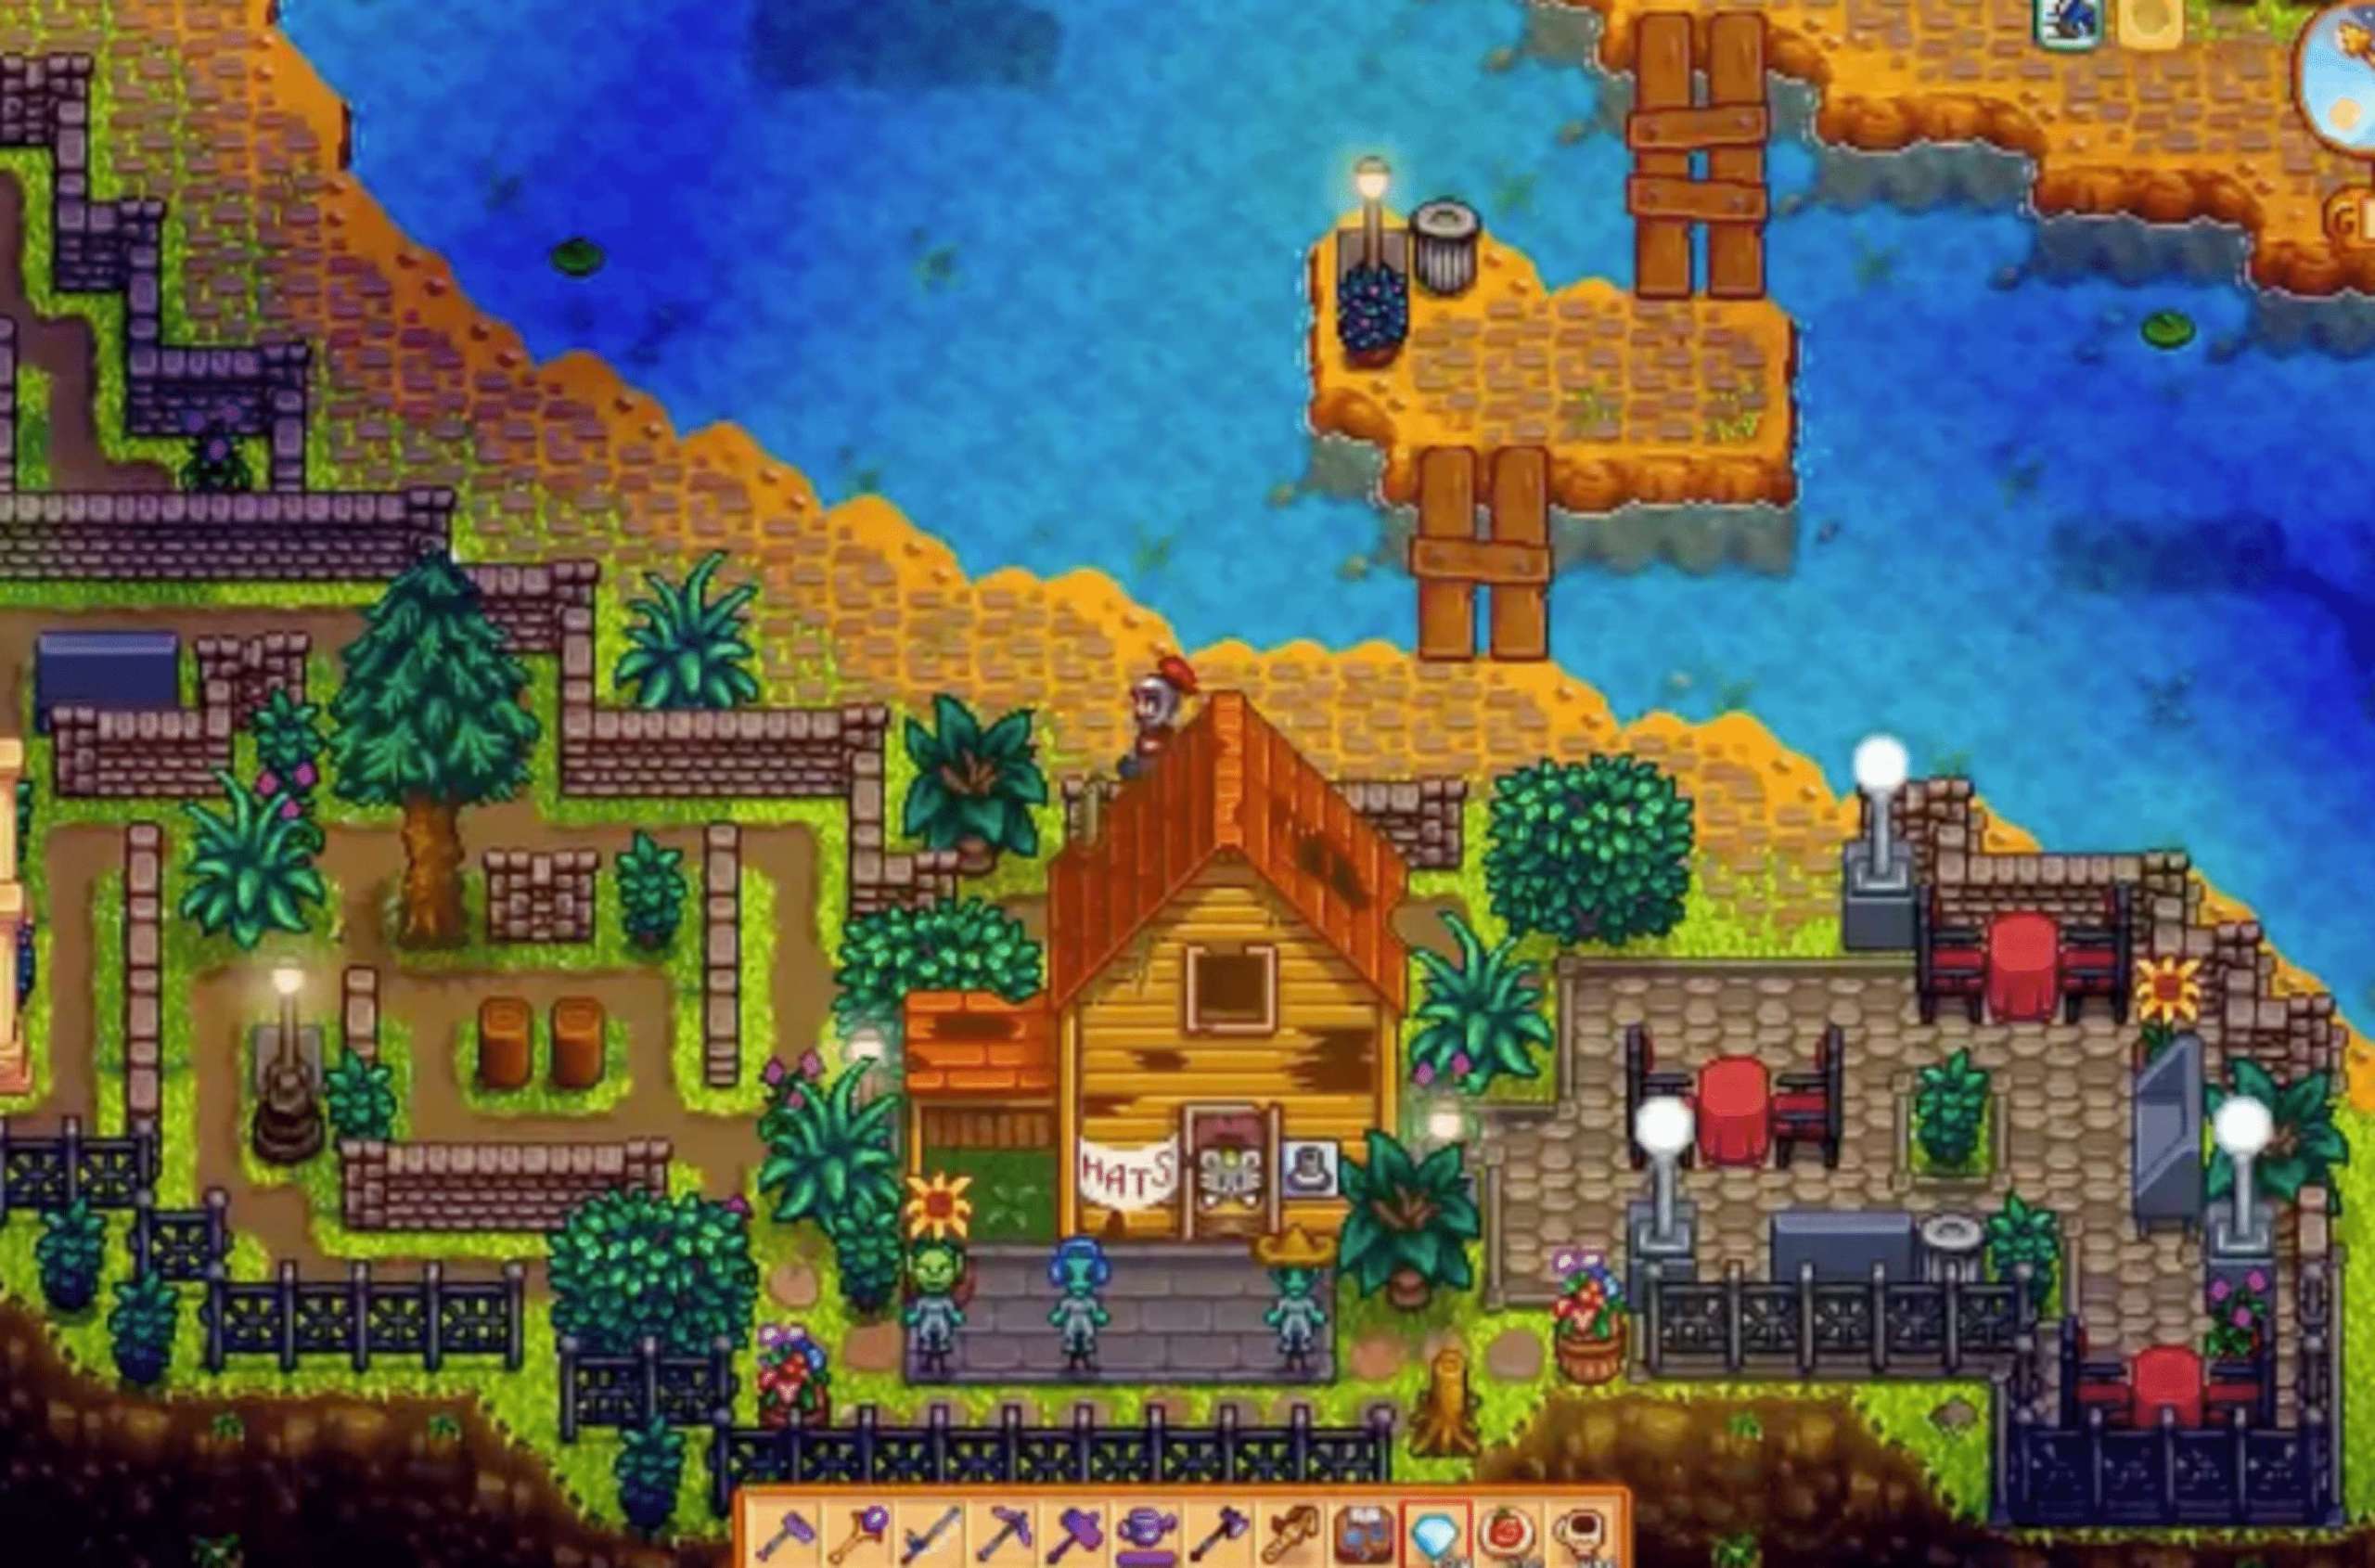 A New Mobile Patch For Stardew Valley: Developer Reveals Expected Launch Date